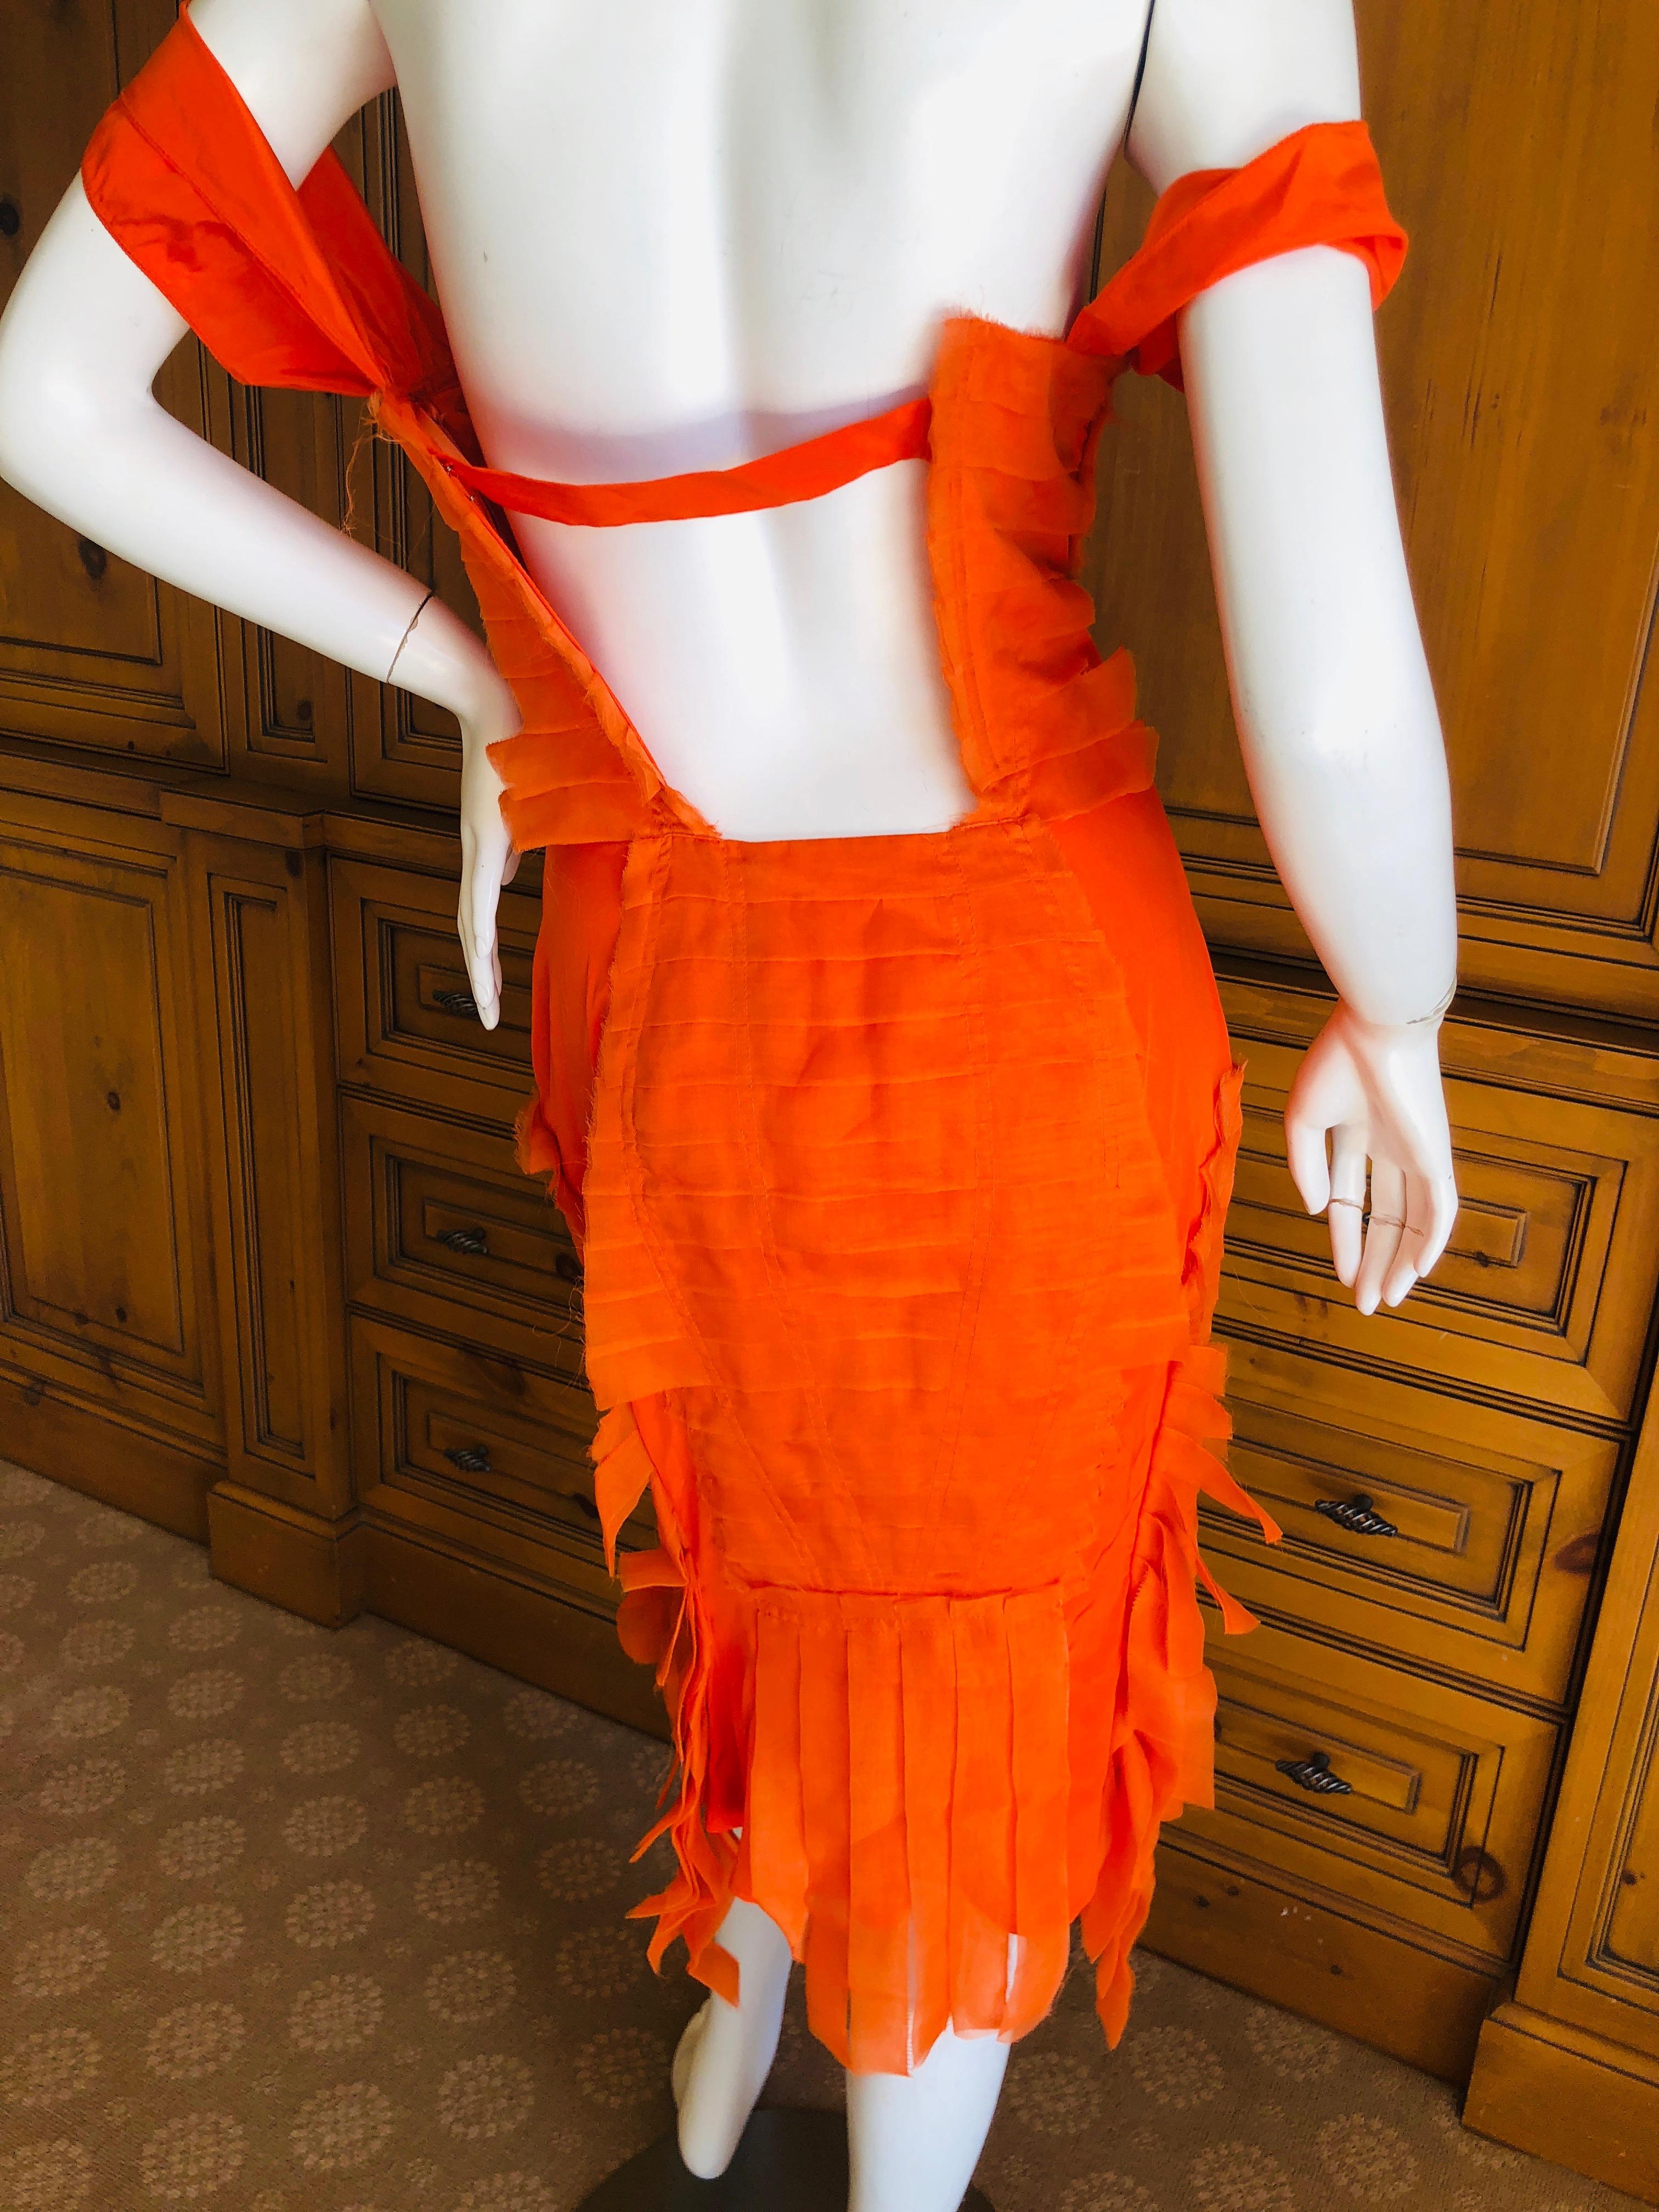 Gucci by Tom Ford 2004 Orange Ribbon Dress Tom Ford Book Piece  For Sale 2